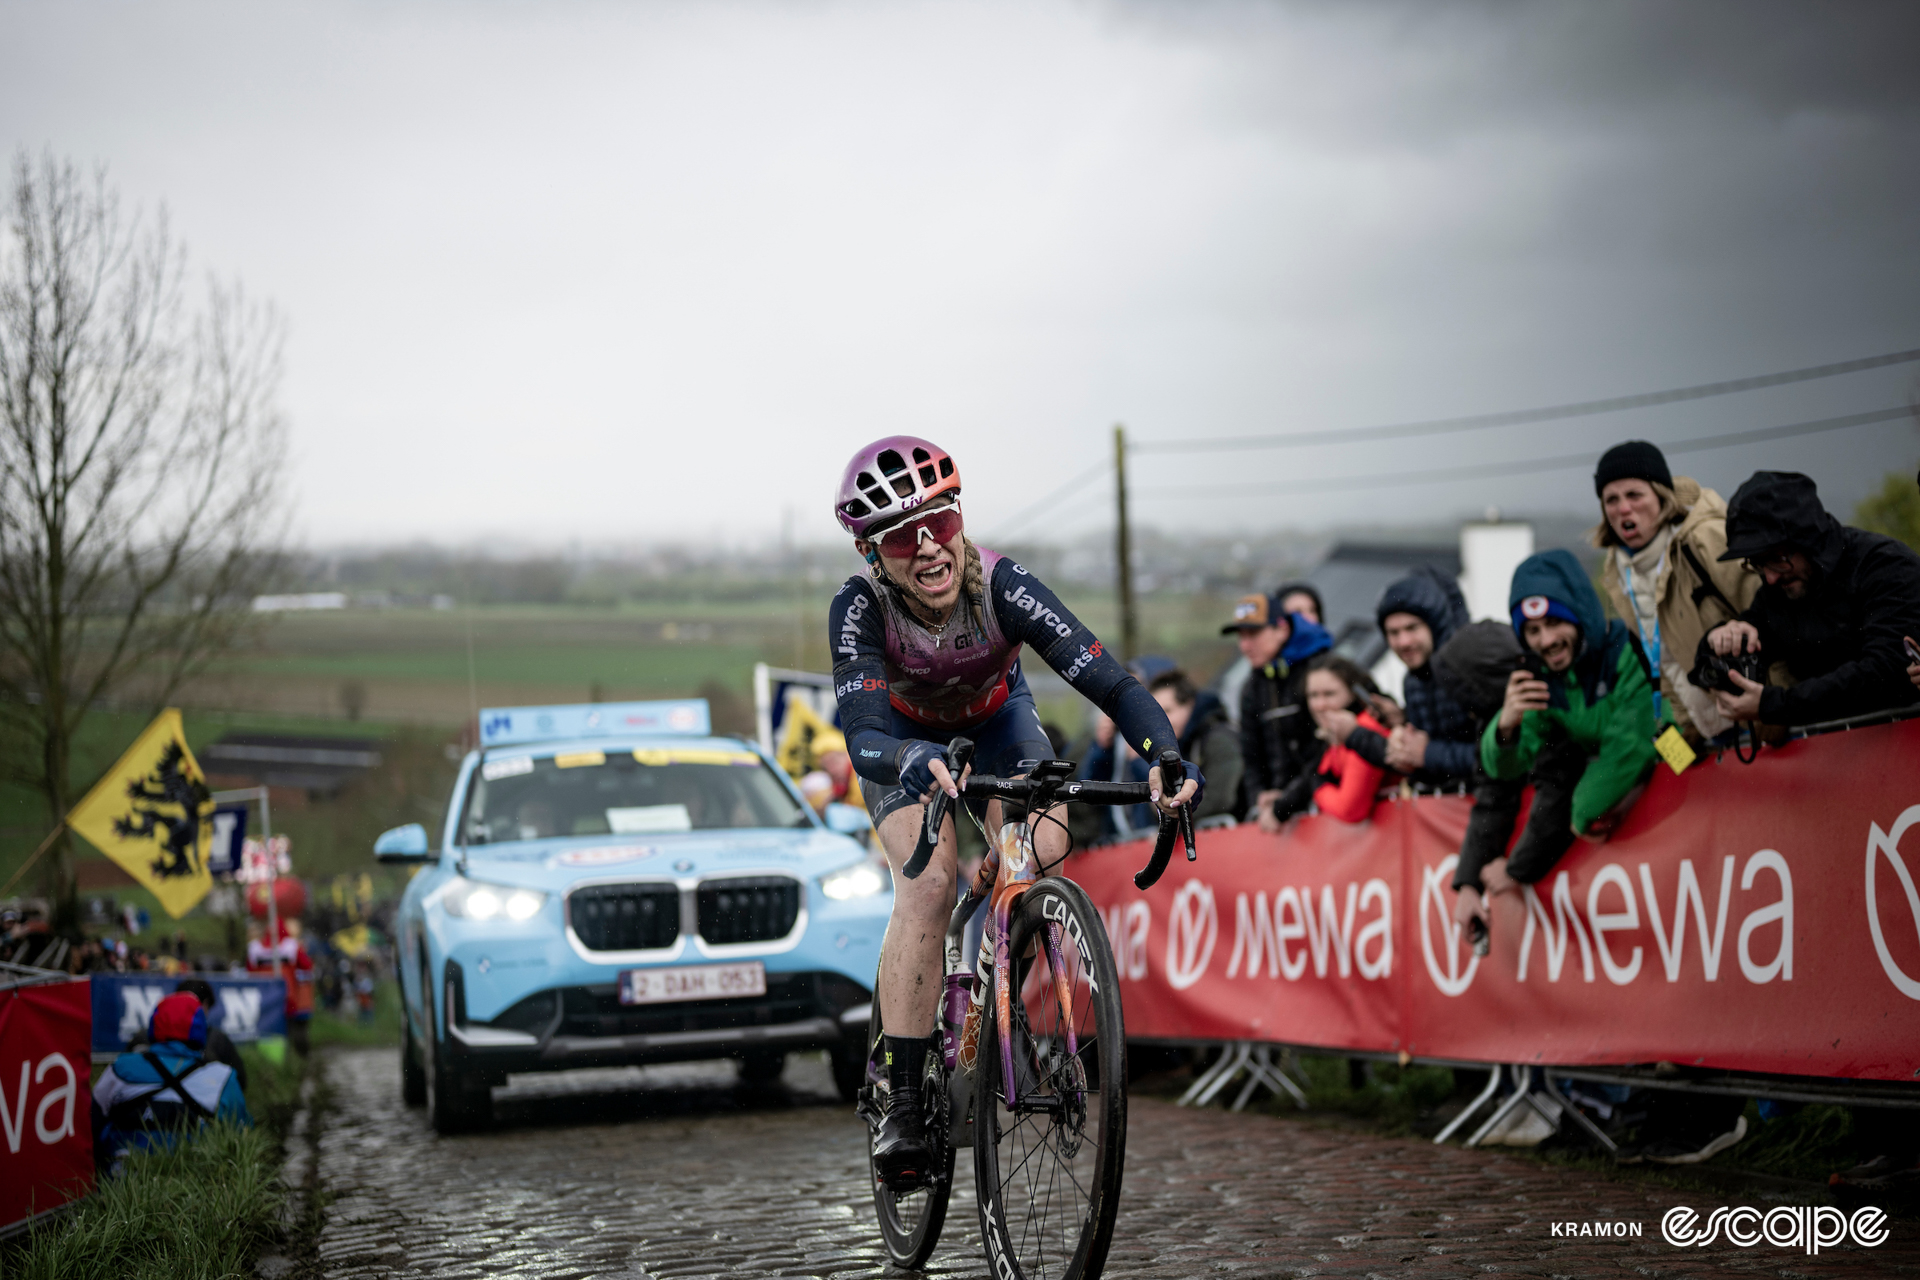 Letizia Paternoster grimaces as she climbs the cobbles in the Tour of Flanders.